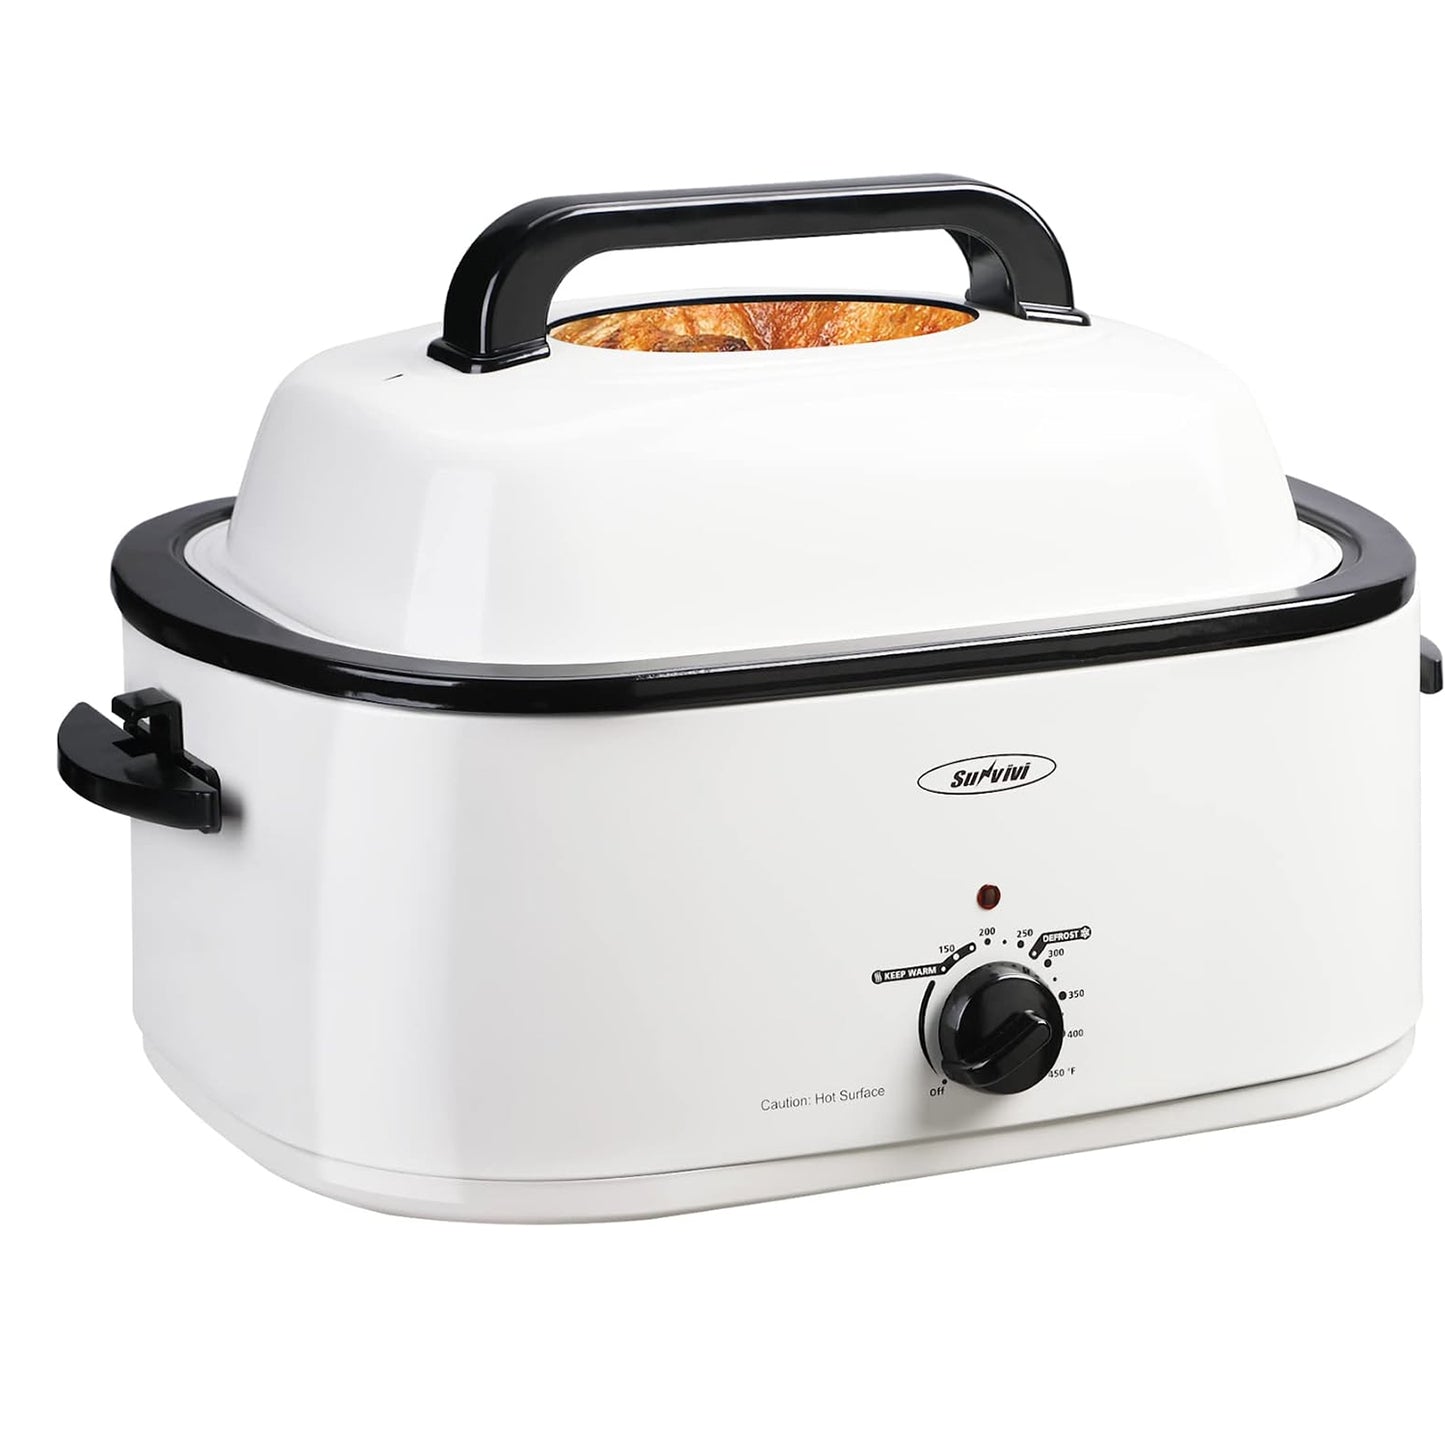 Roaster Oven, Electric Roaster Oven with Viewing Lid, Sunvivi Turkey Roaster with Unique Defrost/Warm Function, Large Roaster with with Removable Pan & Rack , Stainless Steel